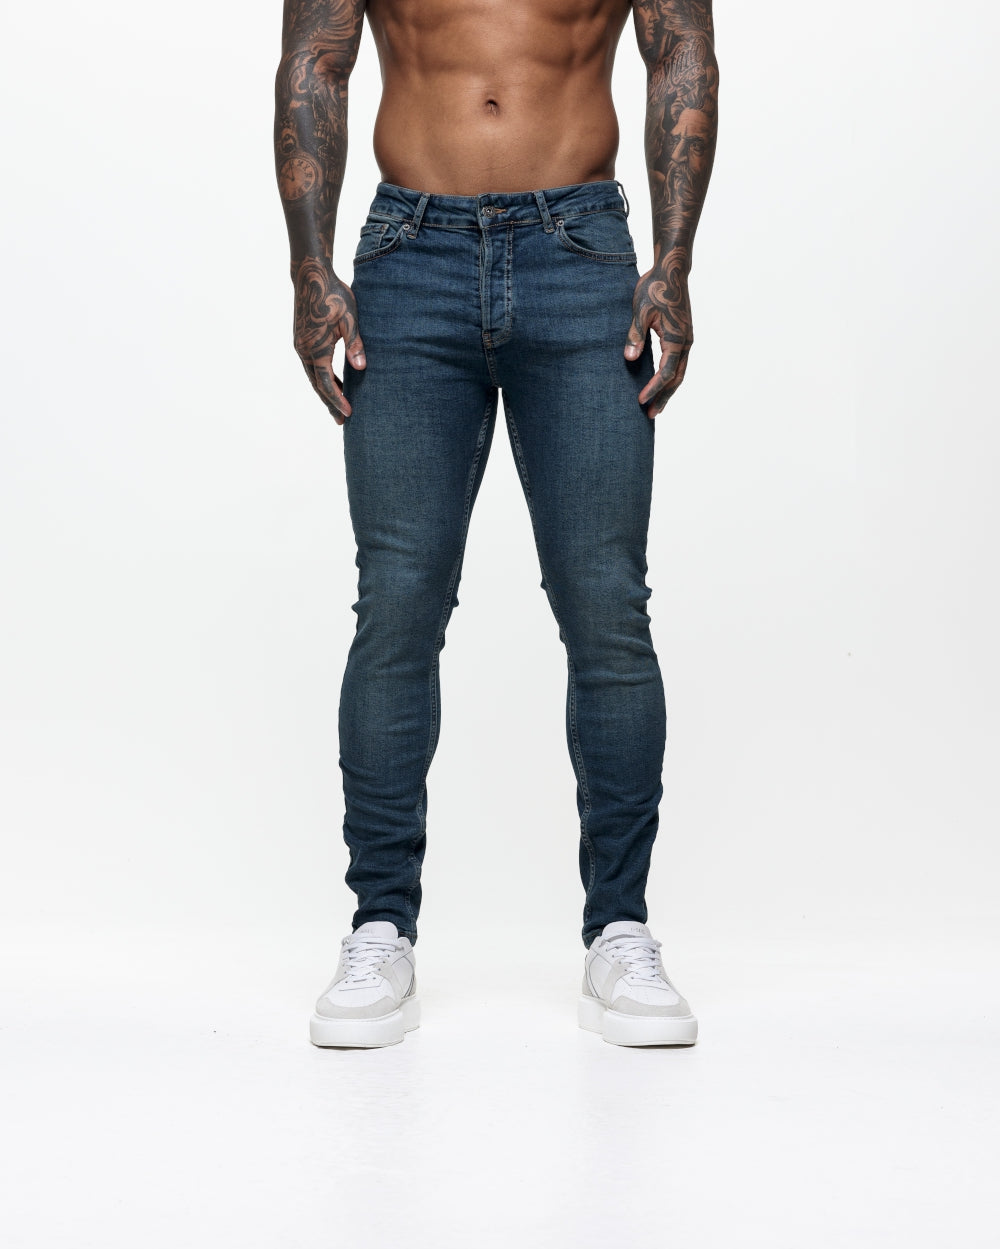 Non Ripped Skinny Jeans - Vintage Blue